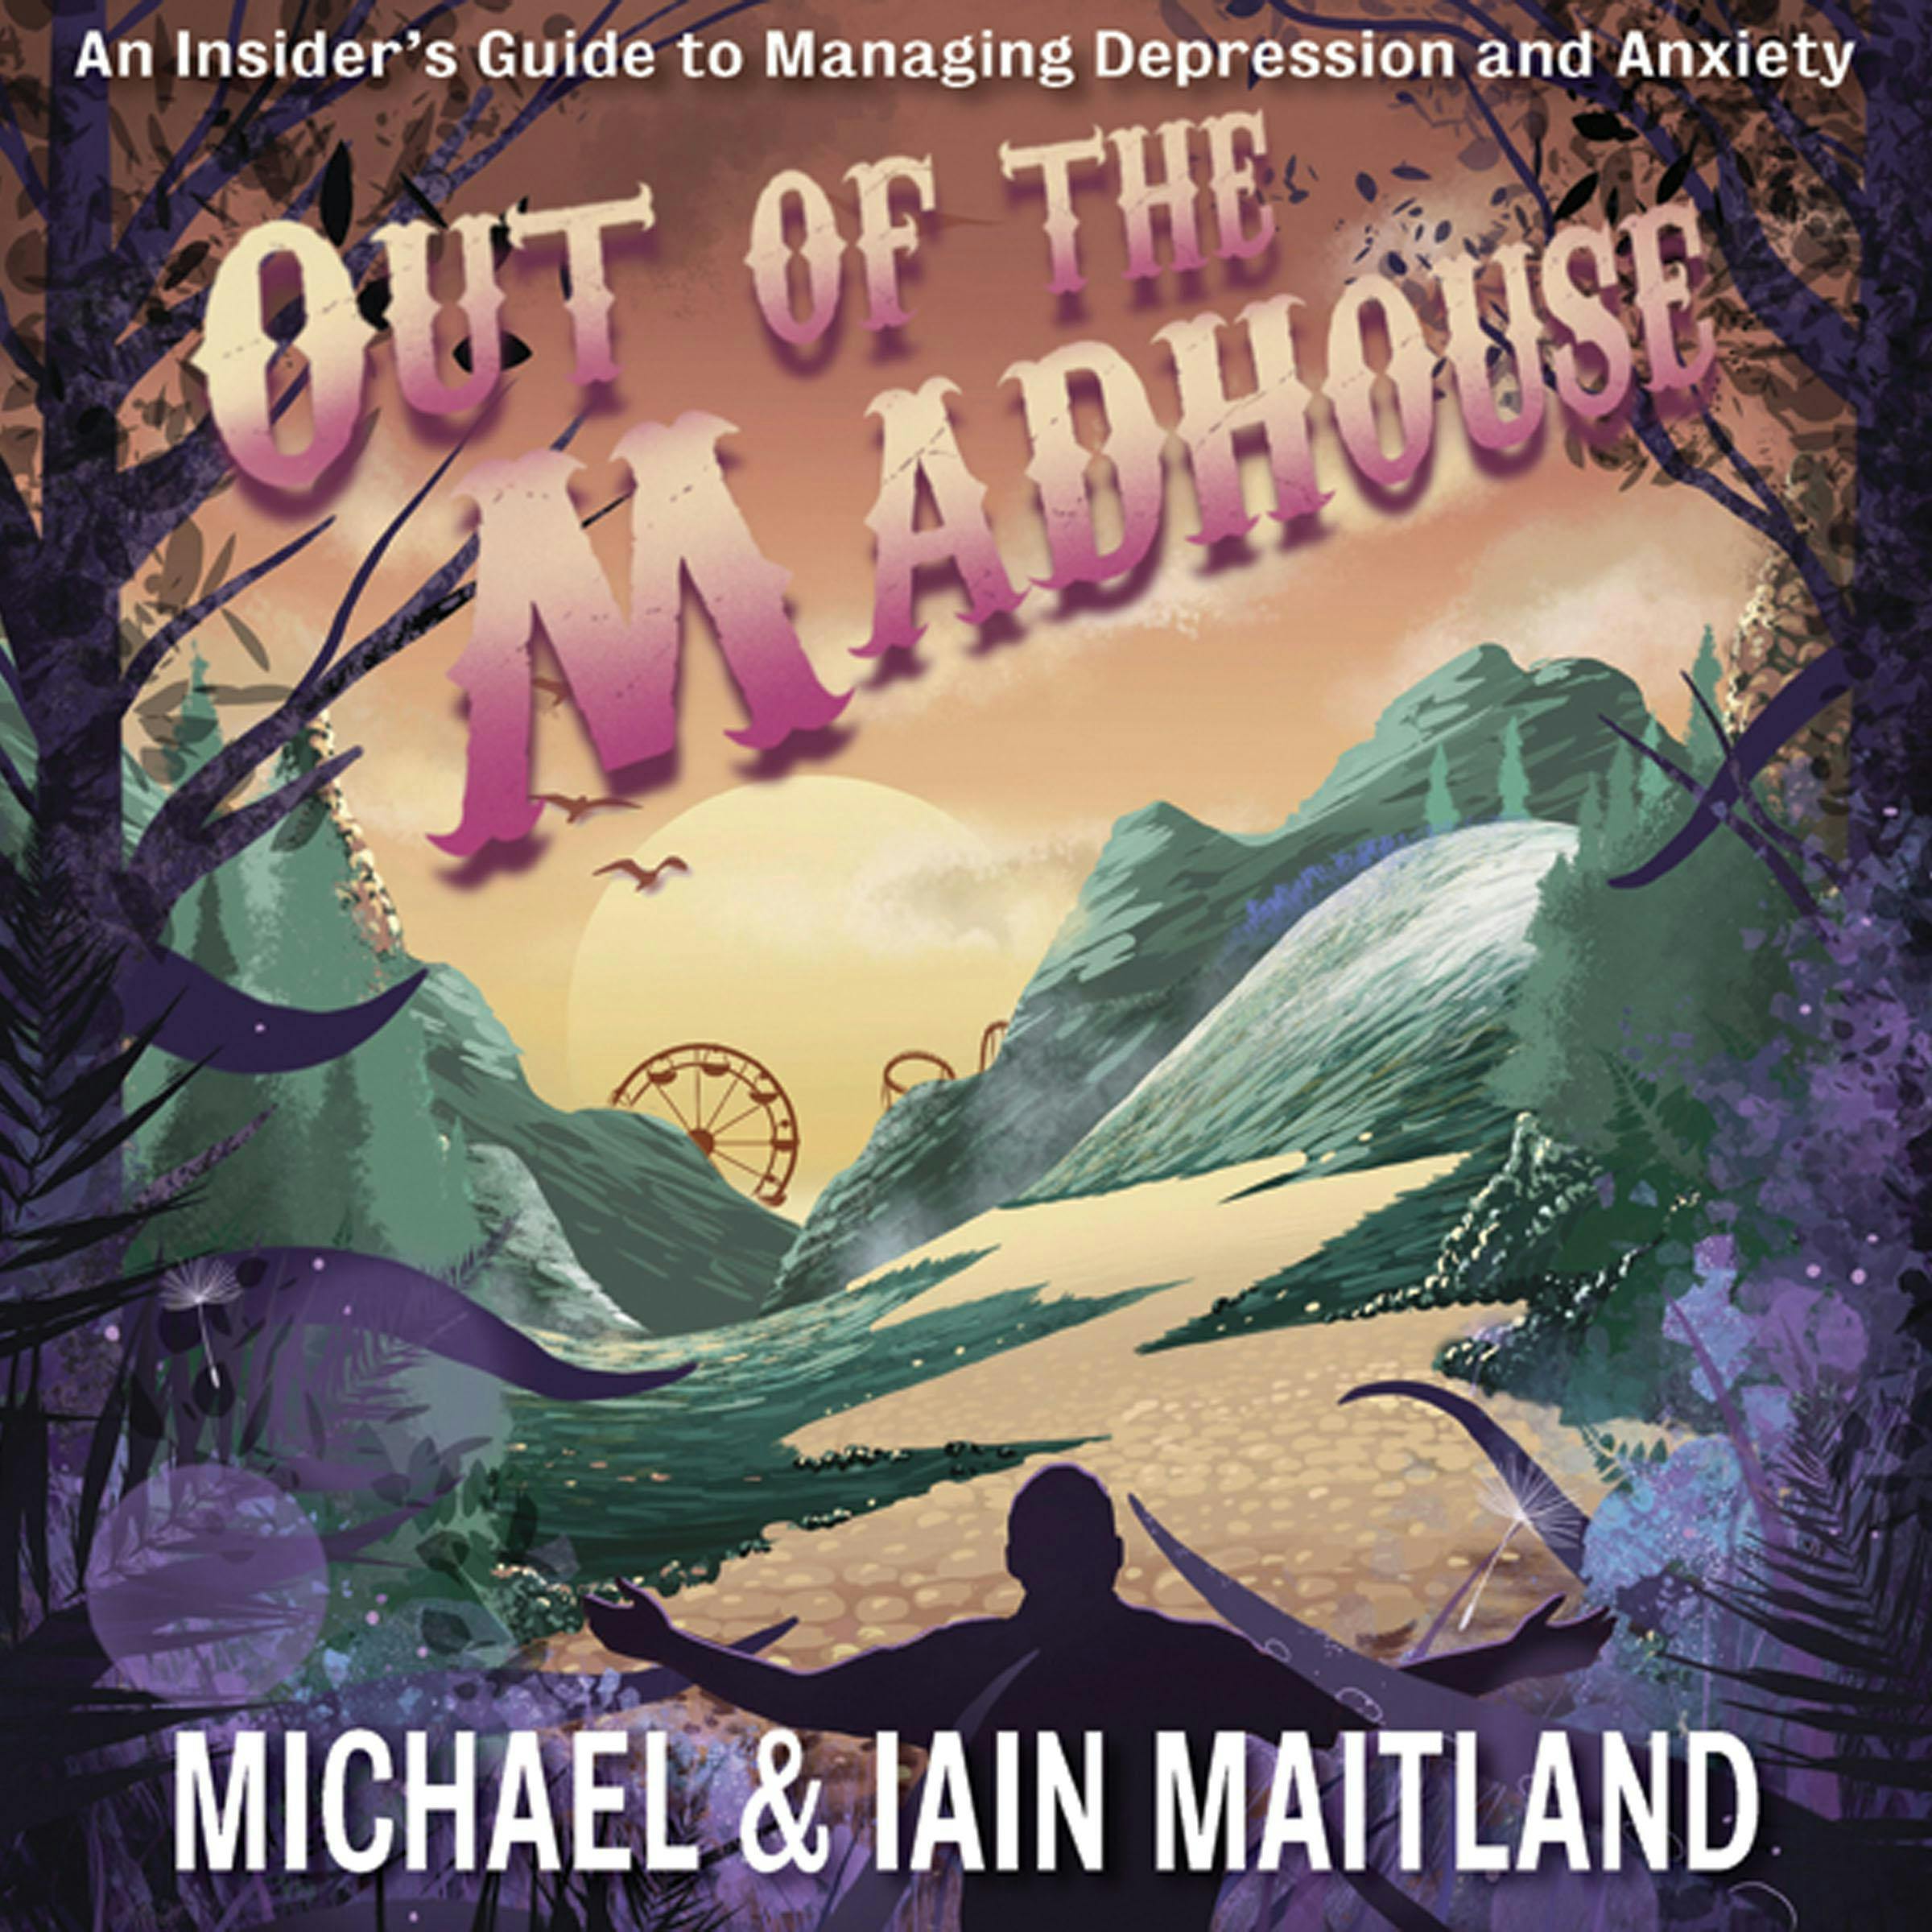 Out of the Madhouse: An Insider's Guide to Managing Depression and Anxiety - undefined